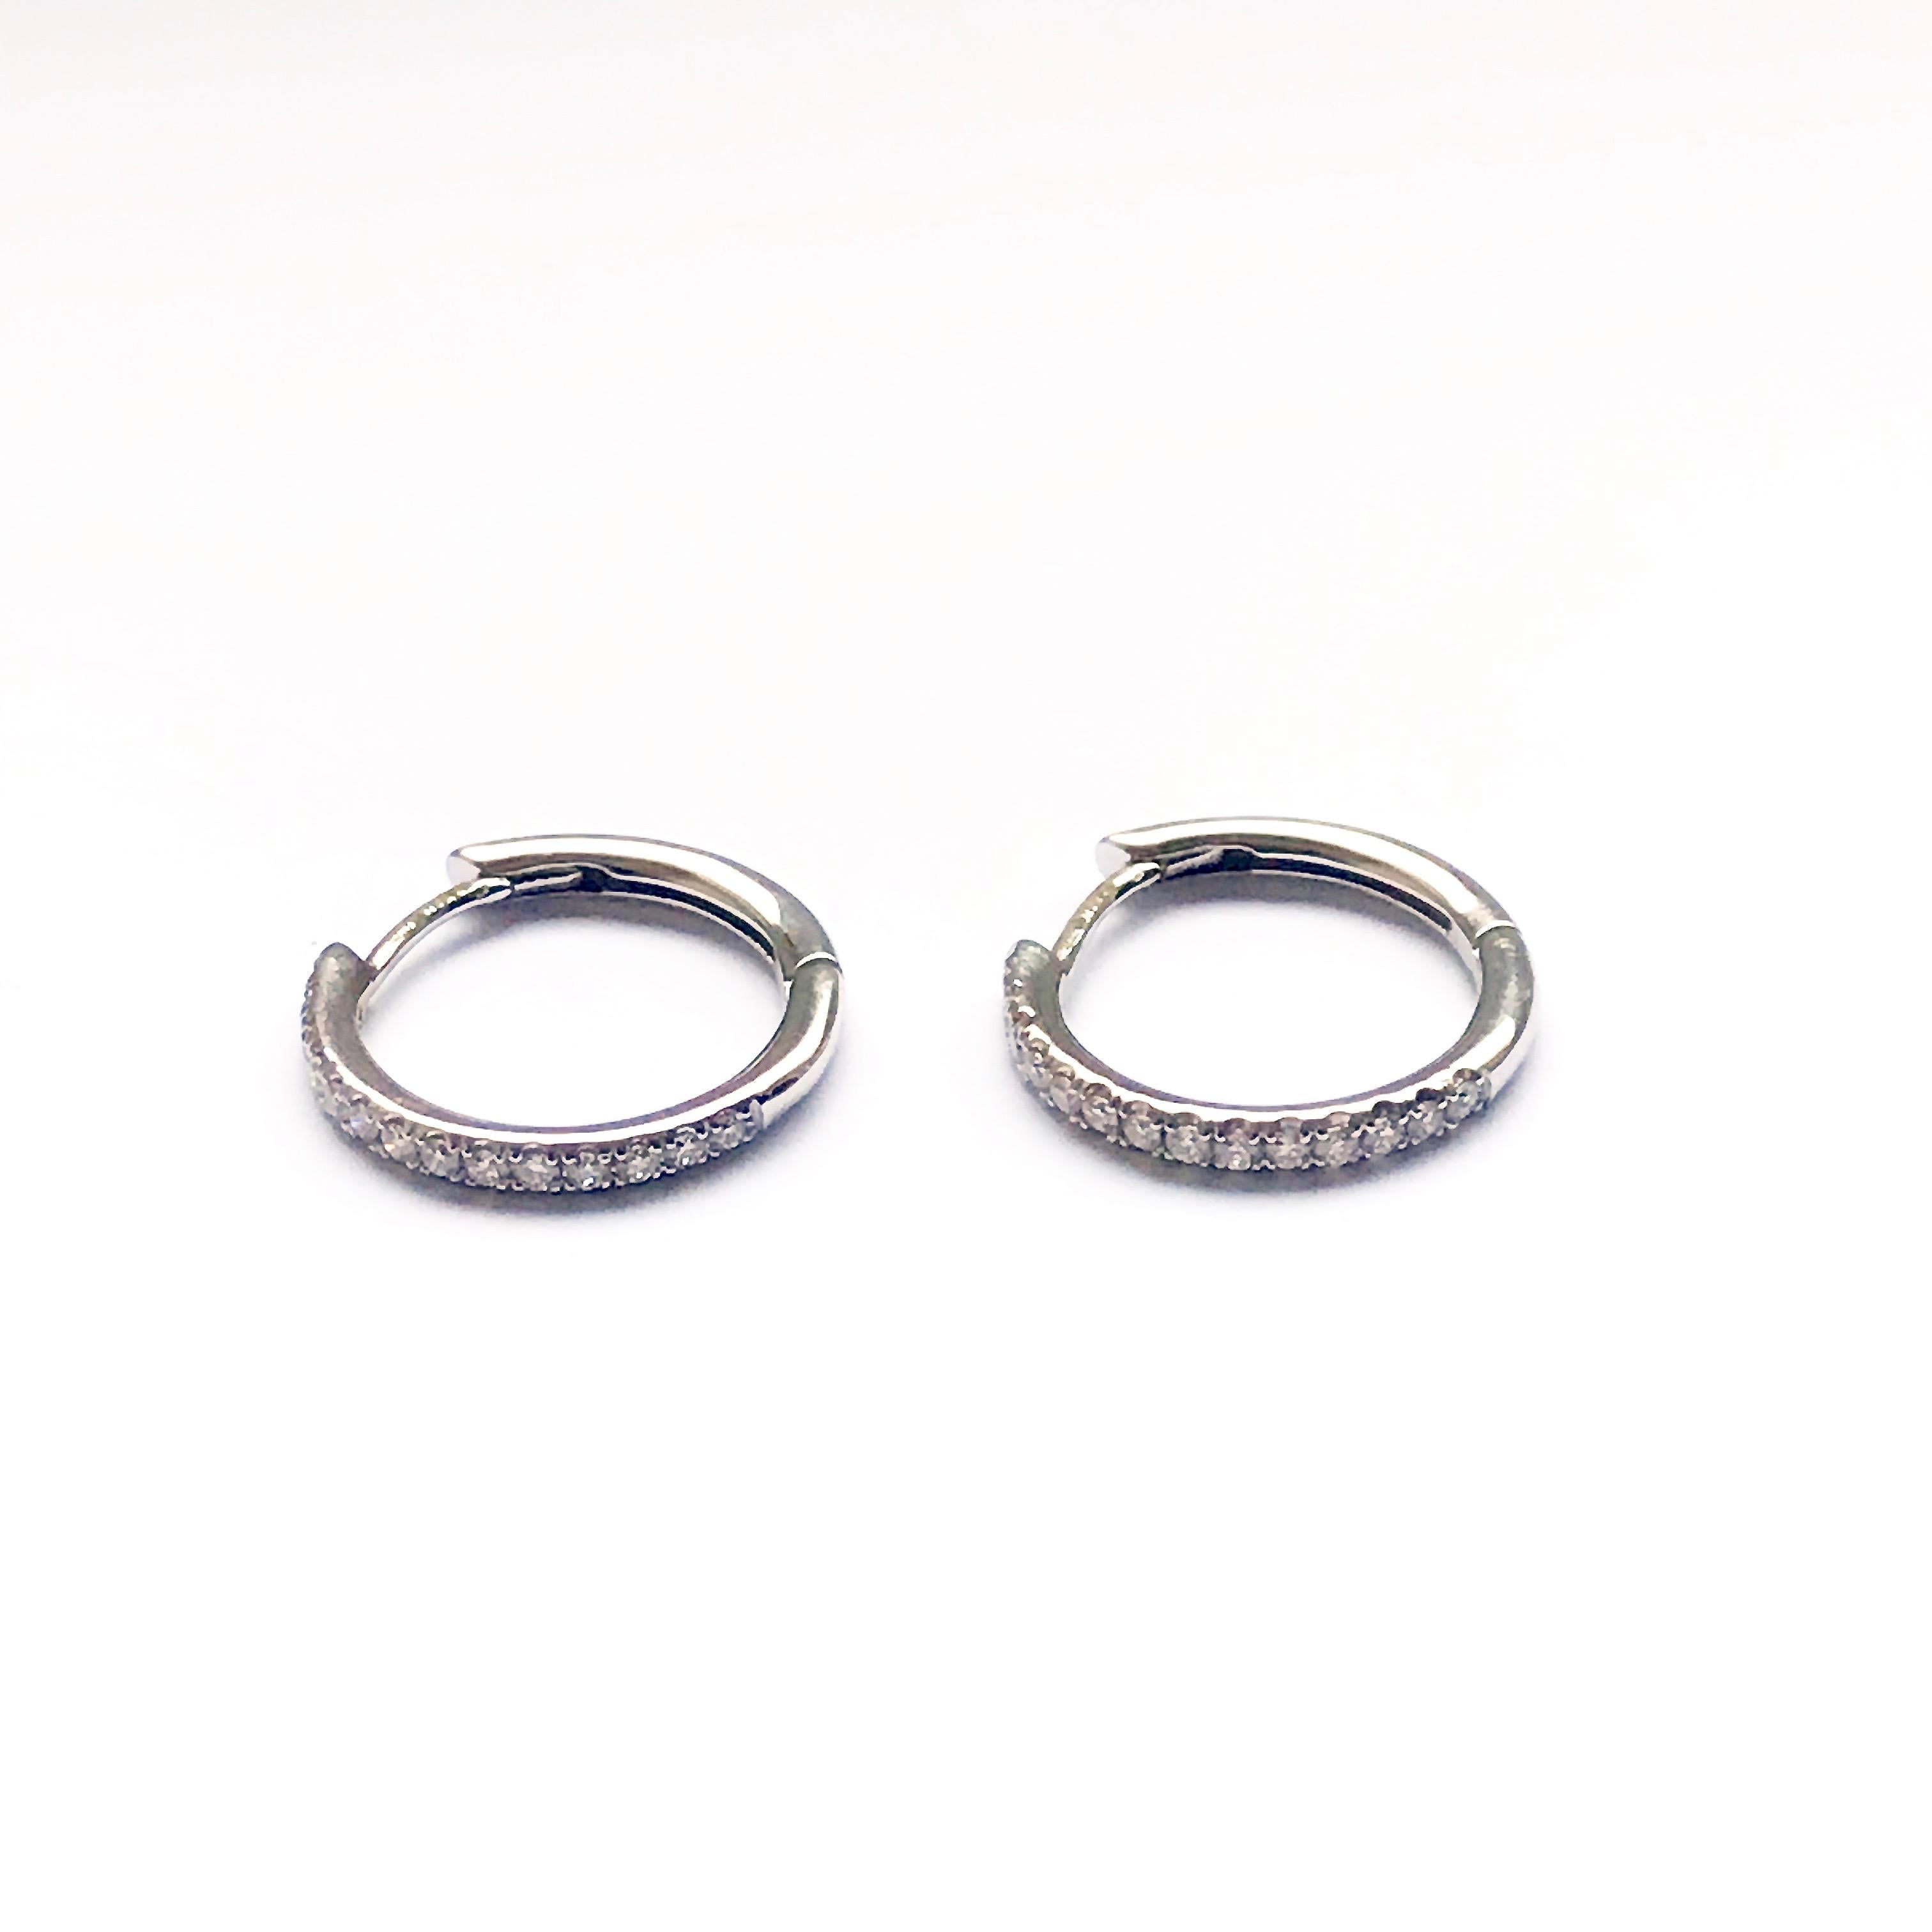 18 Karat solid white gold hoop earrings micro-set with high-quality white diamonds.
Timeless, easy to wear, gives a touch of elegance to any outfit appropriate for almost all occasions.
Gauge: 1.8mm
Width ( diameter) : 1.57cm
Gemstone: White